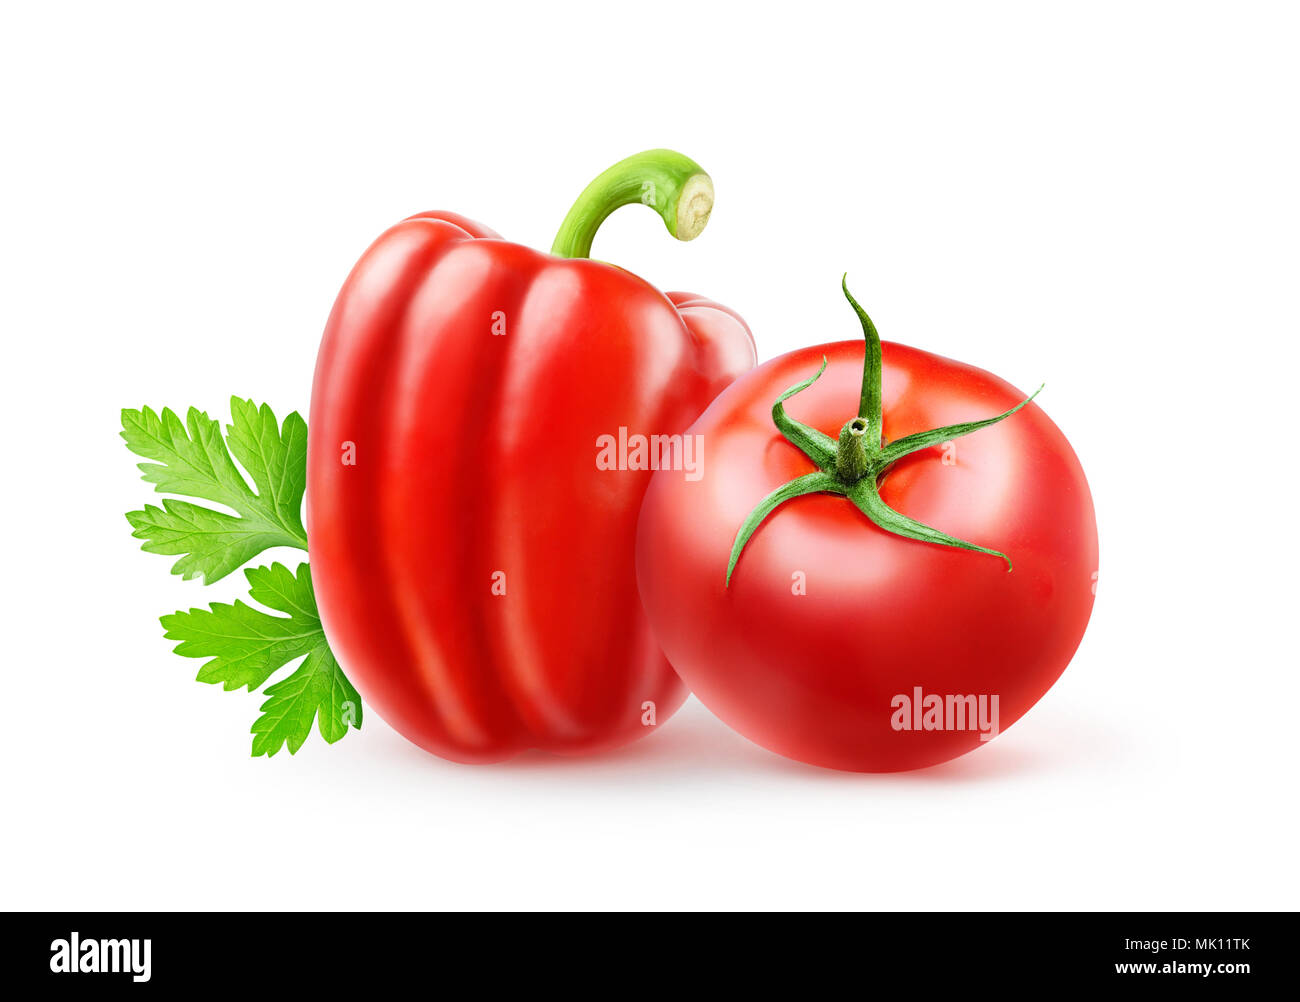 Isolated salade ingredients. Red bell pepper, tomato and parsley leaf isolated on white with clipping path Stock Photo